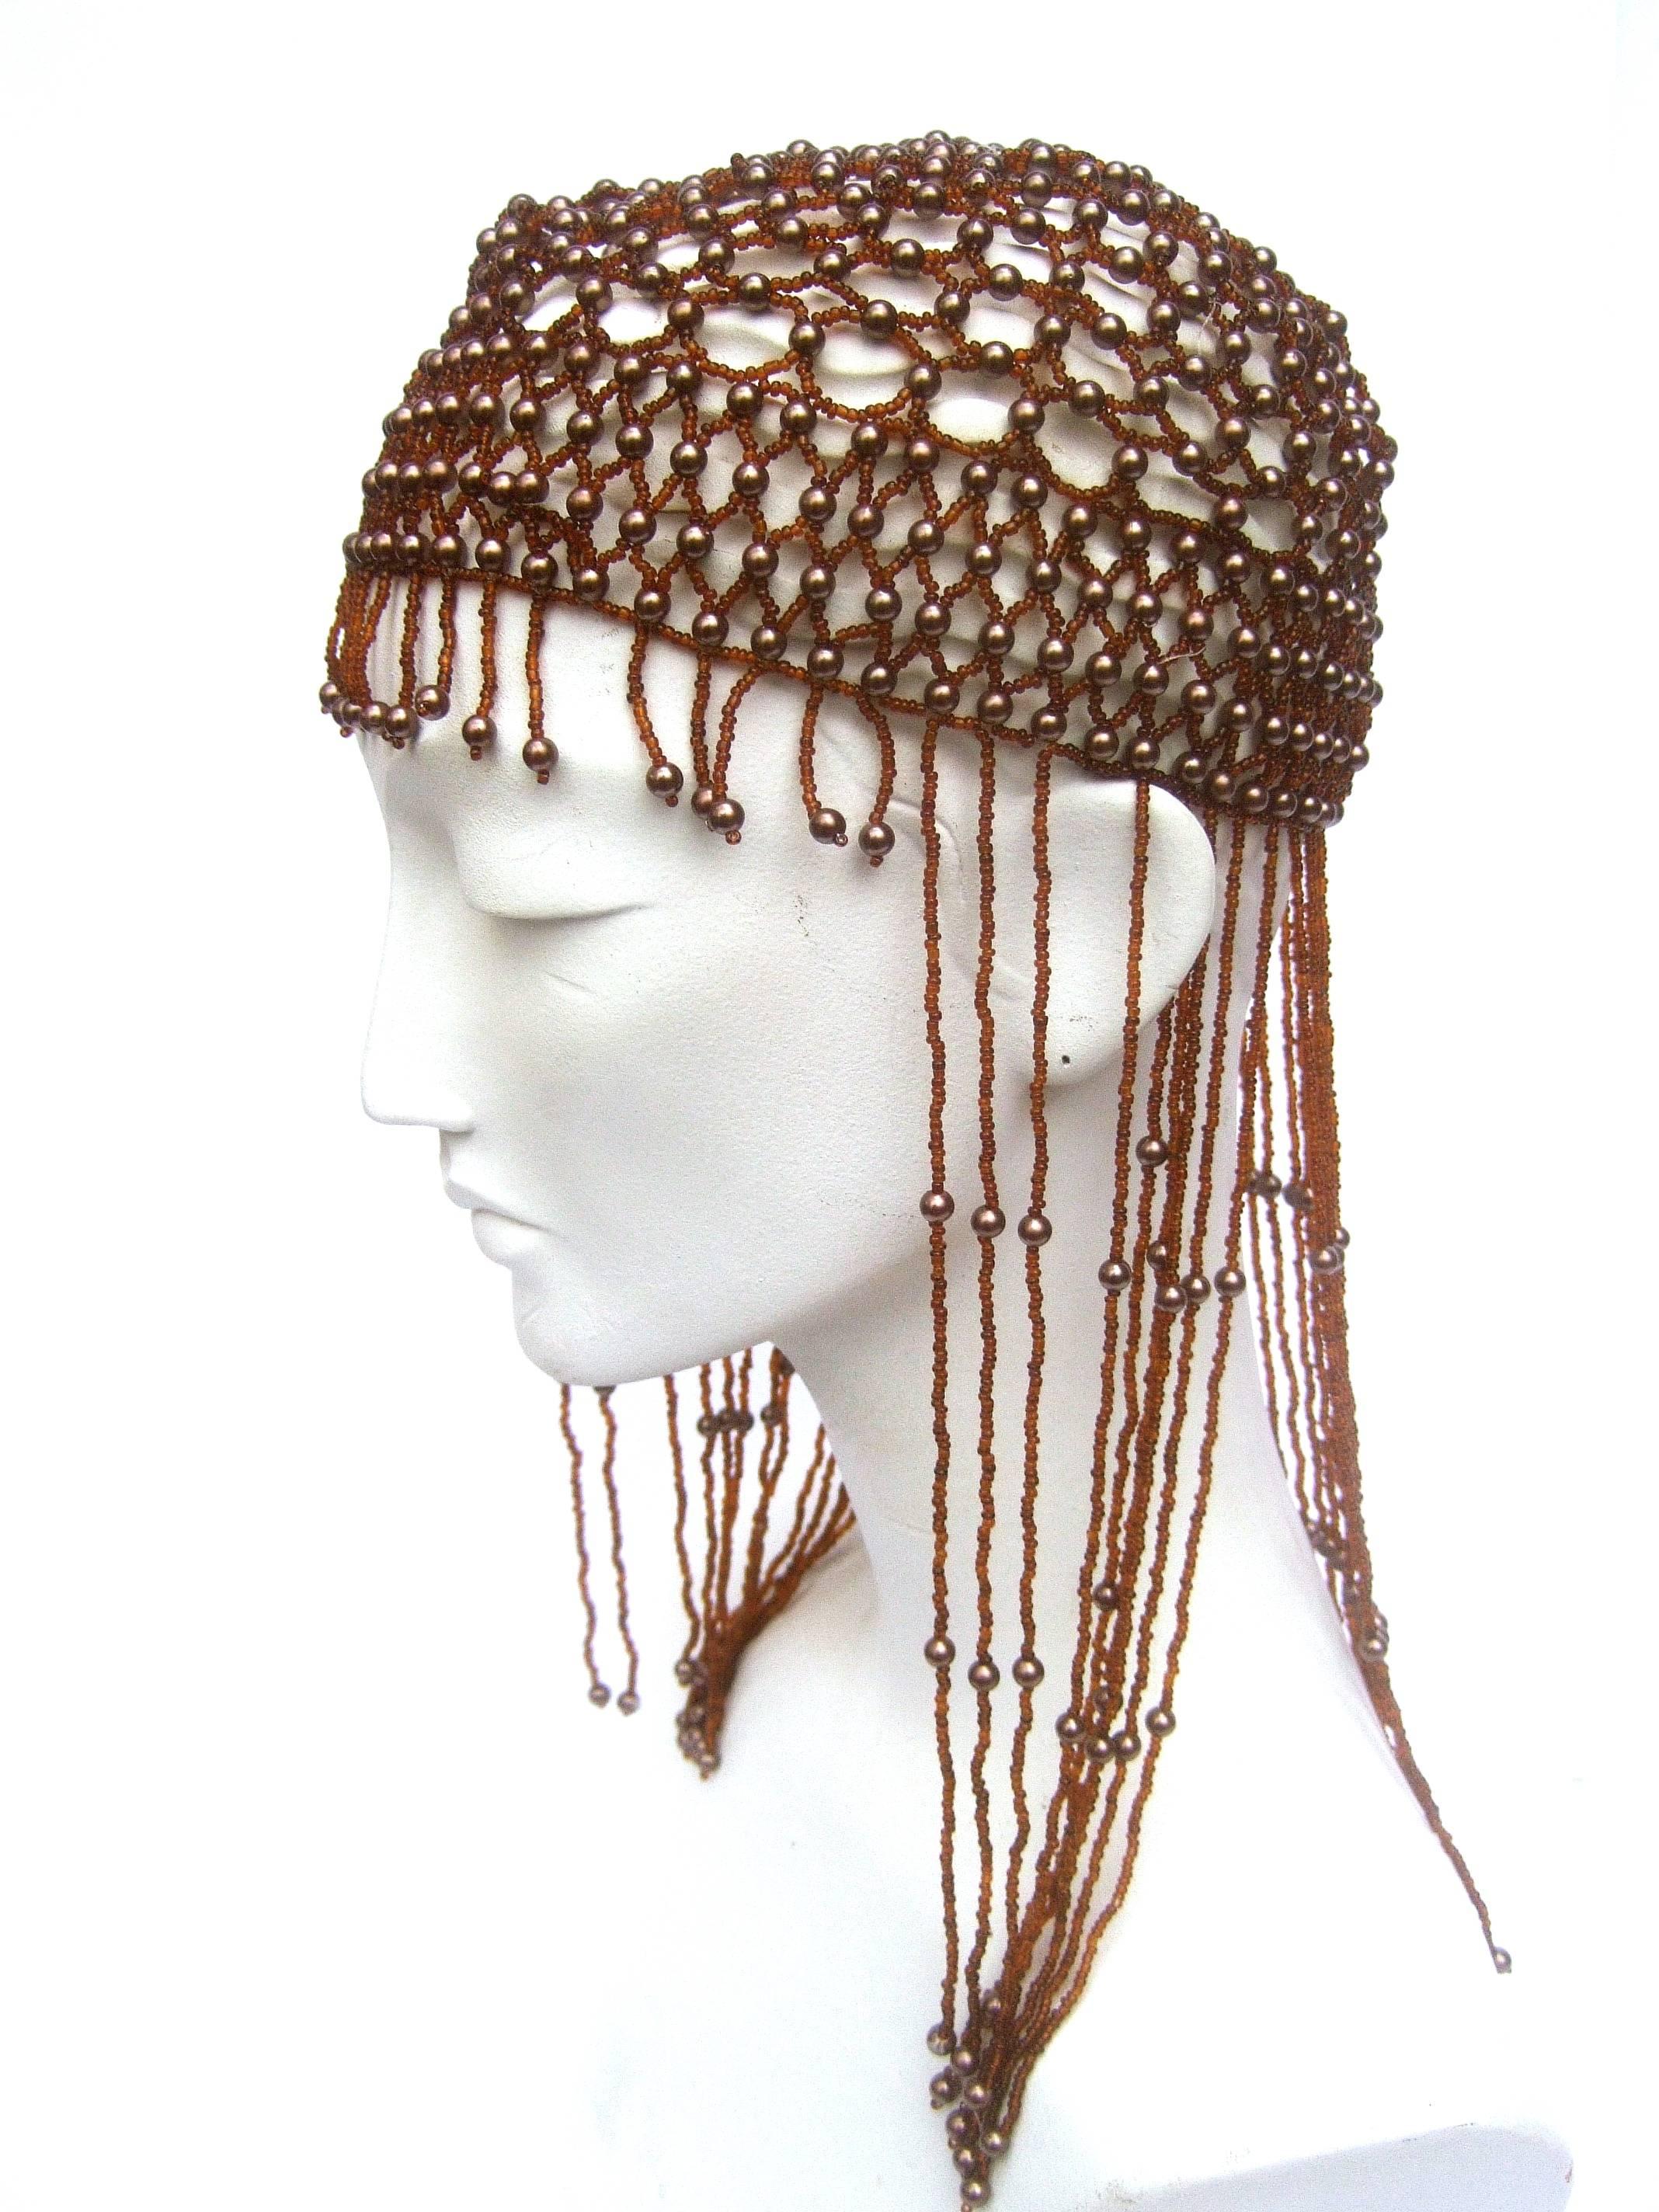 Exotic brown fringe beaded headpiece 
The unique headpiece is designed with a series
of beaded fringe tassels 

The beaded cap is accented with bronze enamel 
resin pearls. Running across the forehead are a 
series of beaded fringe tassels

Makes a